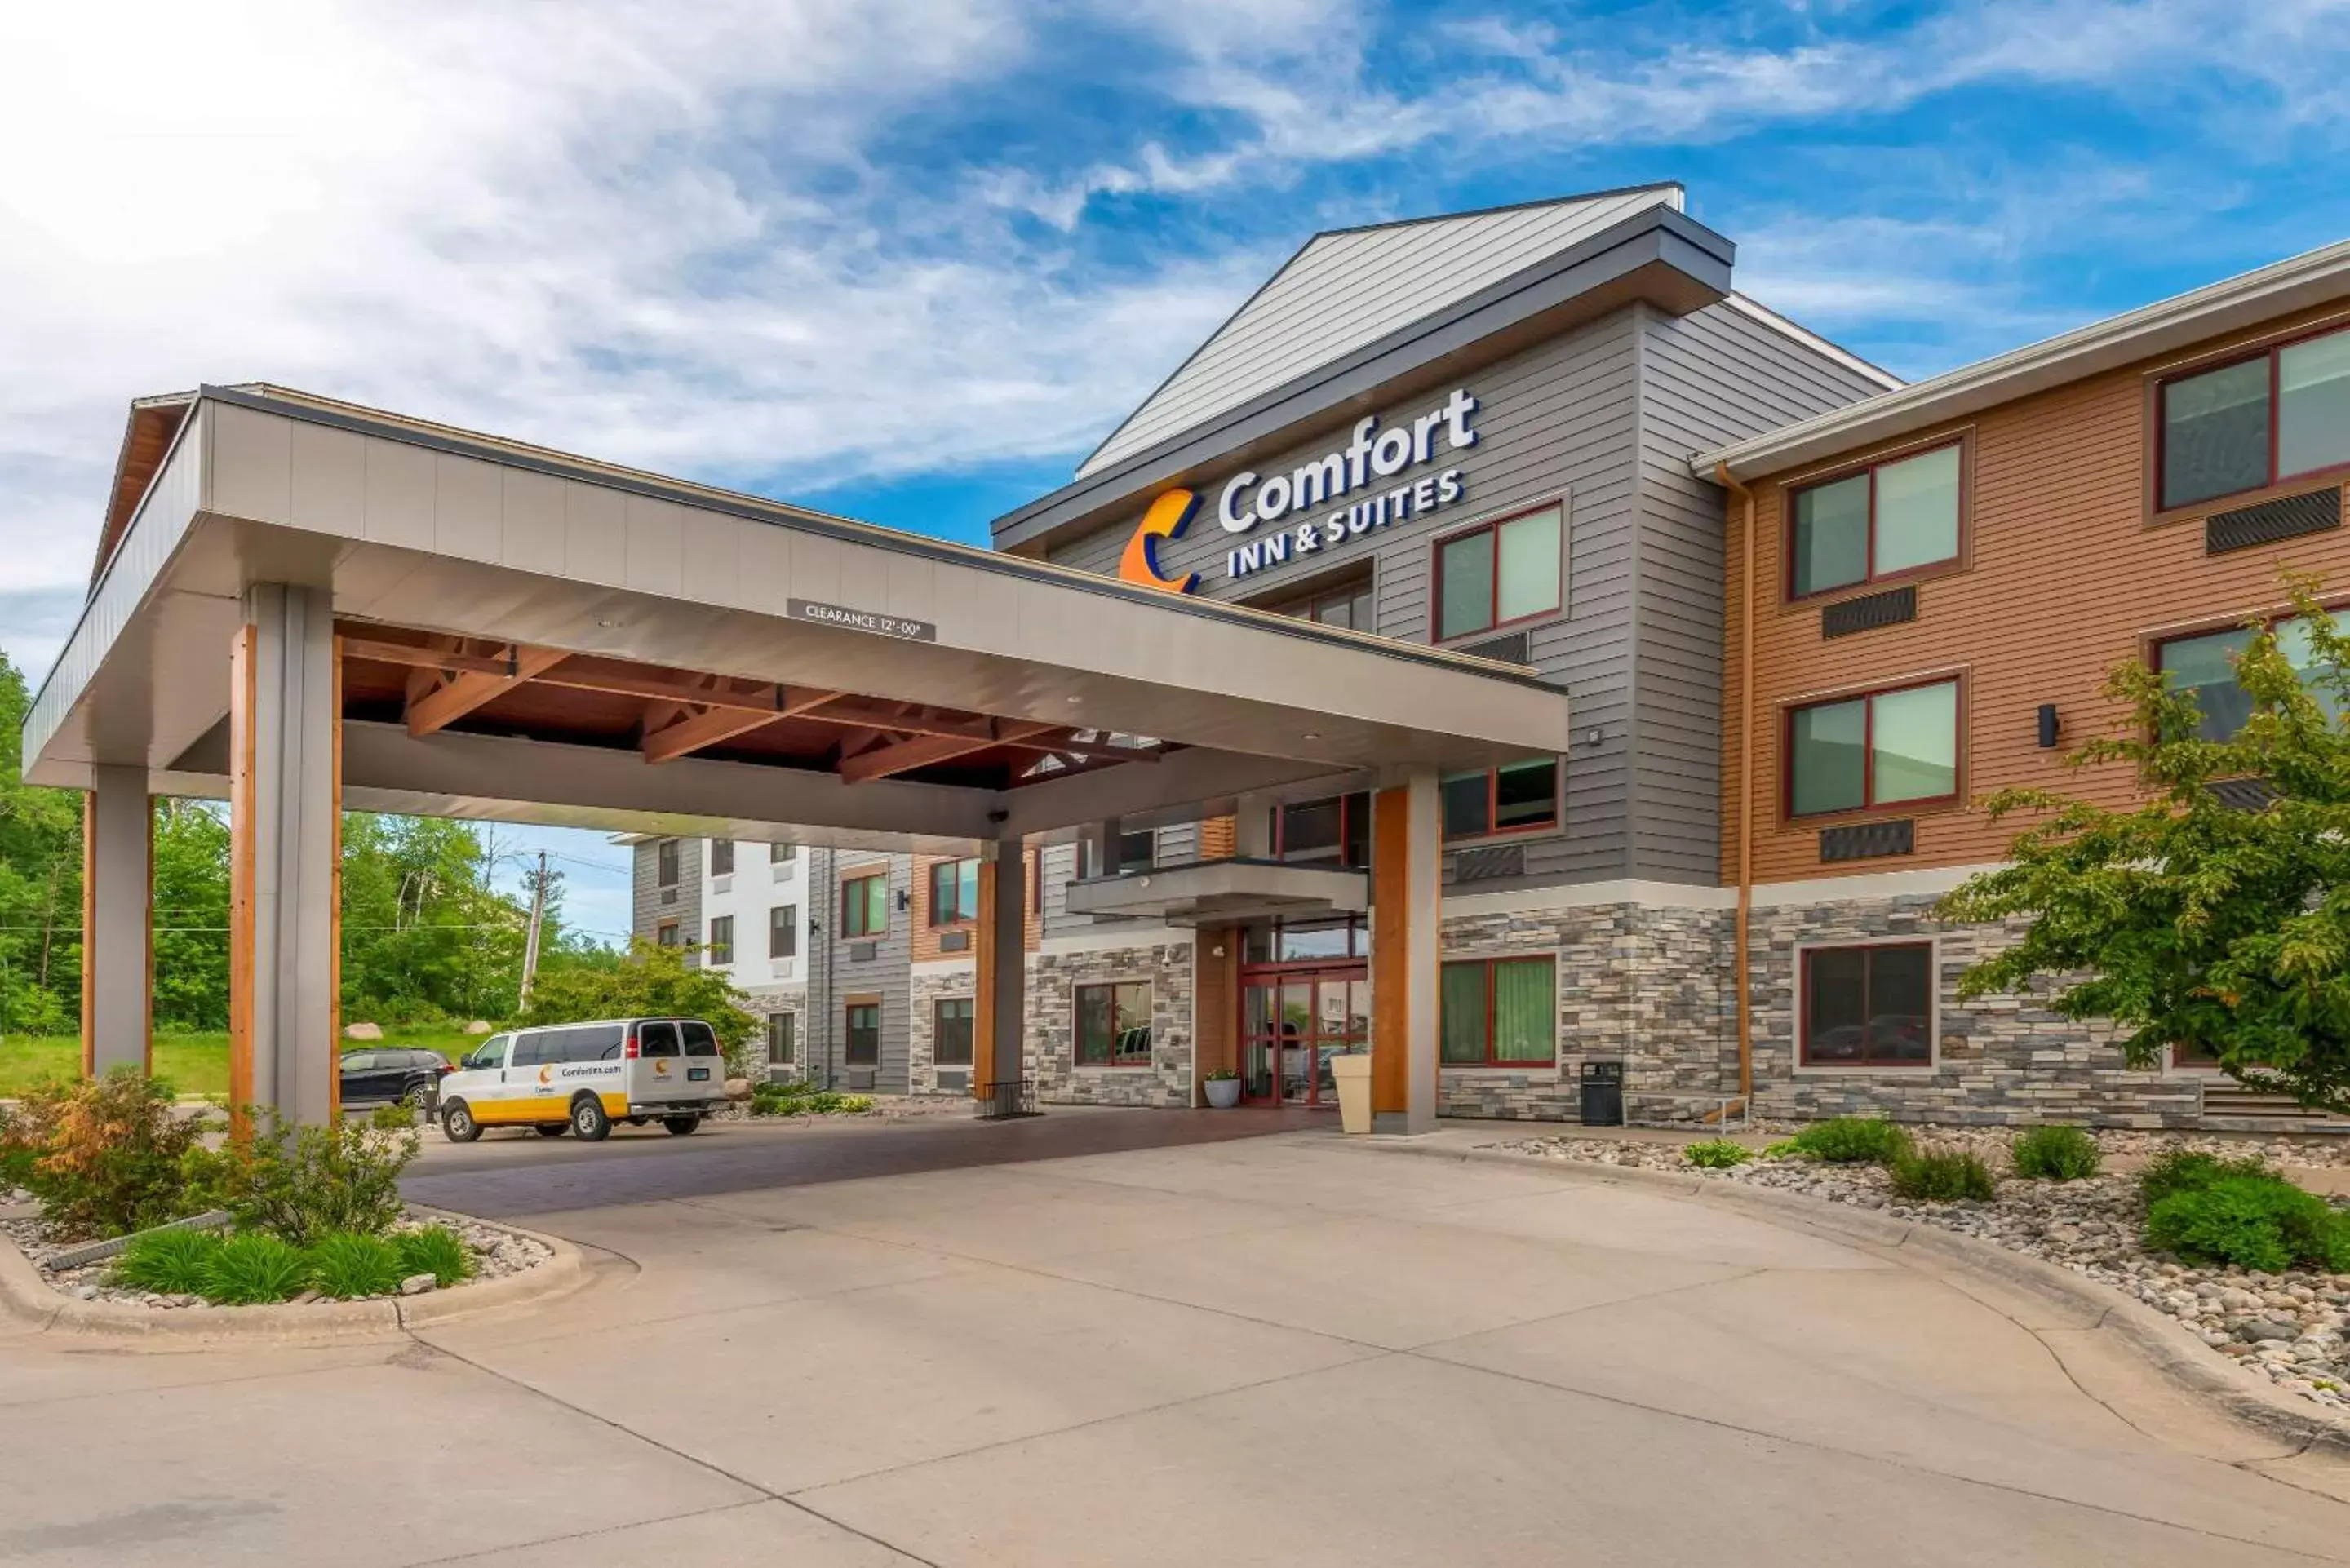 Property building in Comfort Inn & Suites Mountain Iron and Virginia